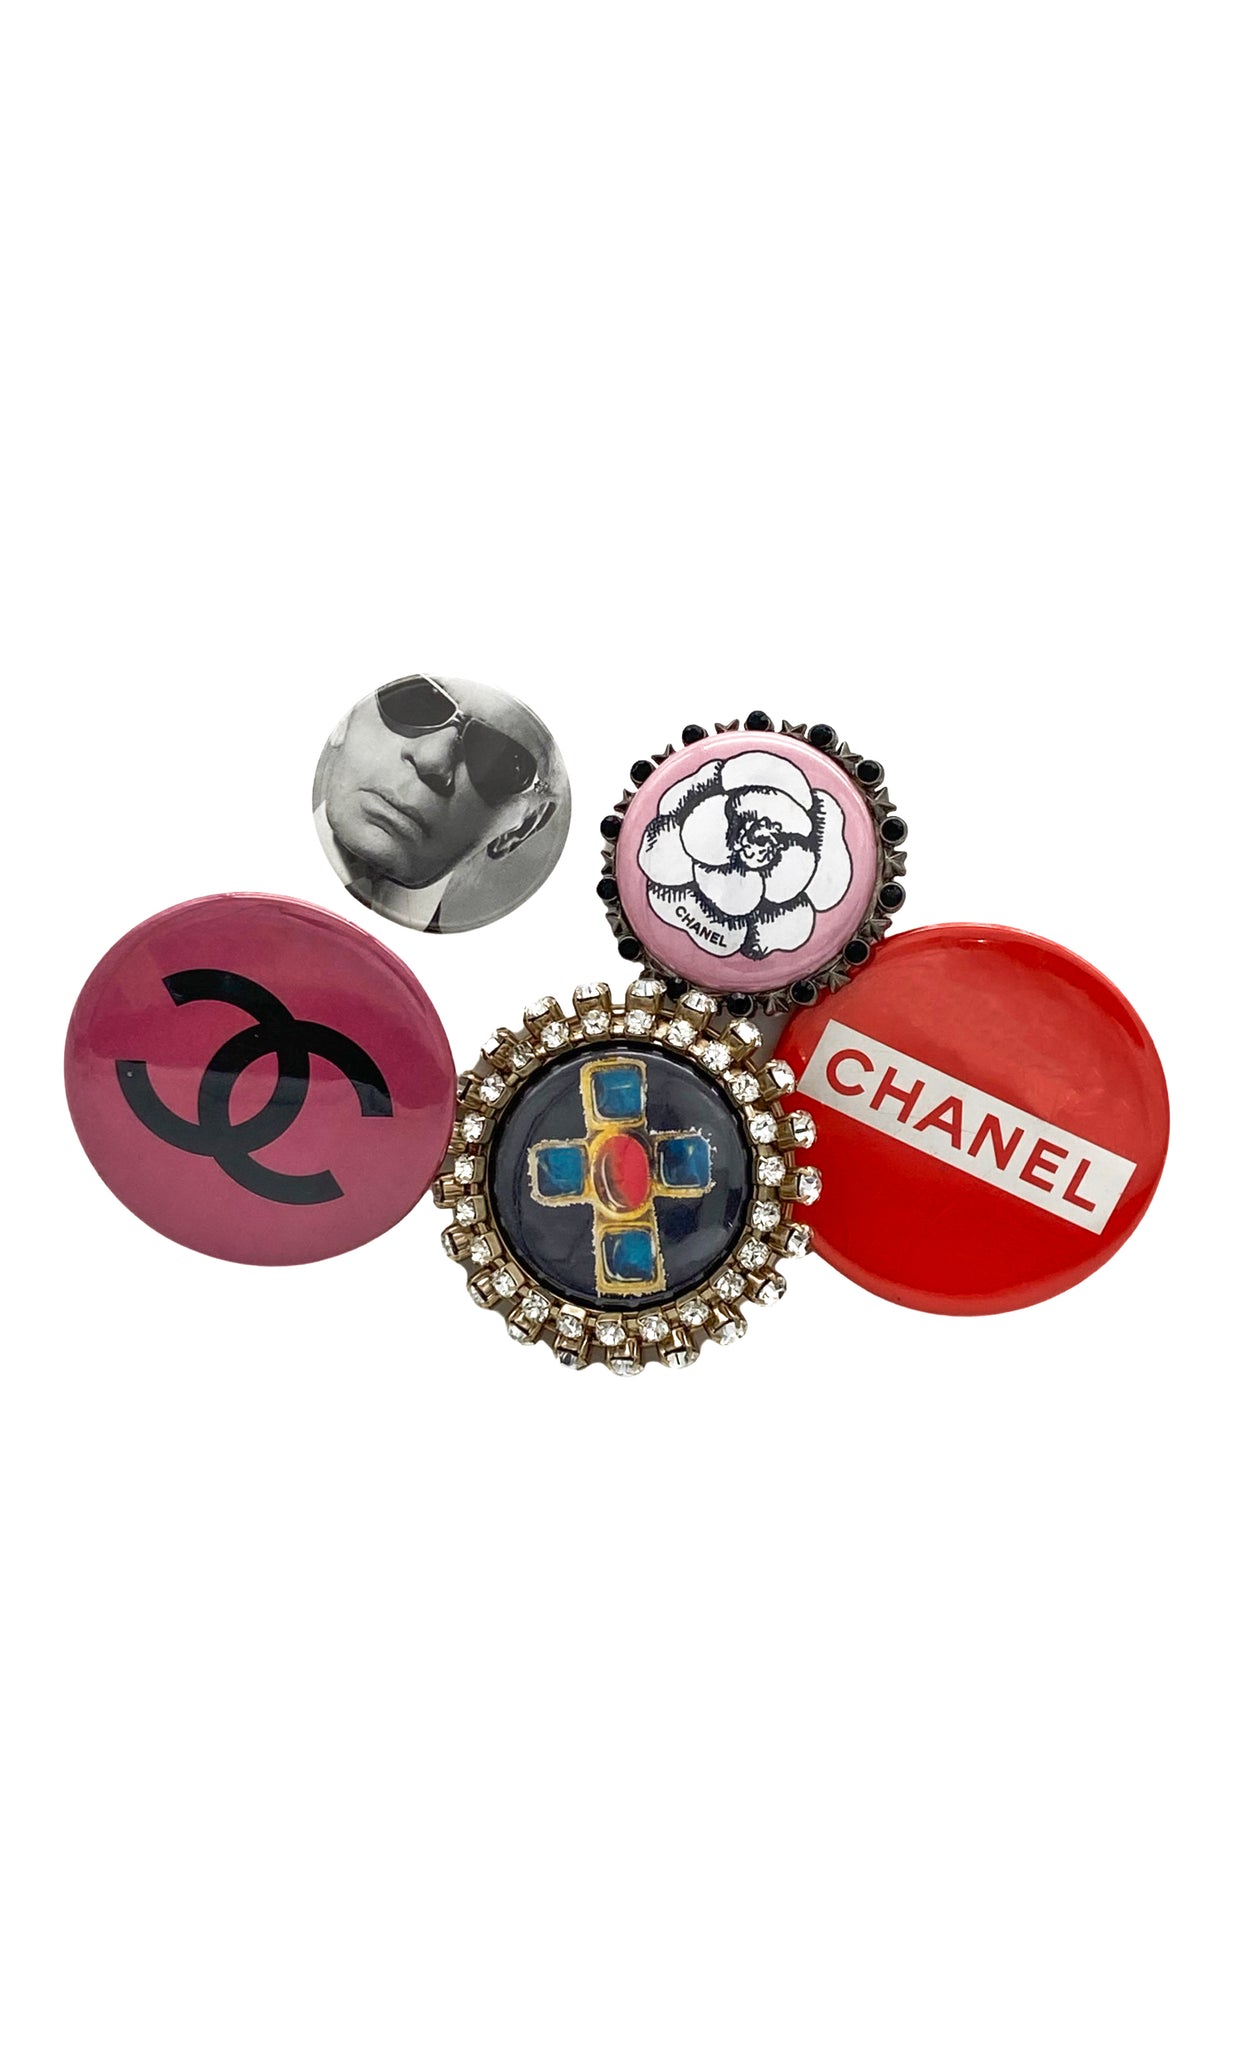 Pin on CHANEL & KARL LAGERFELD